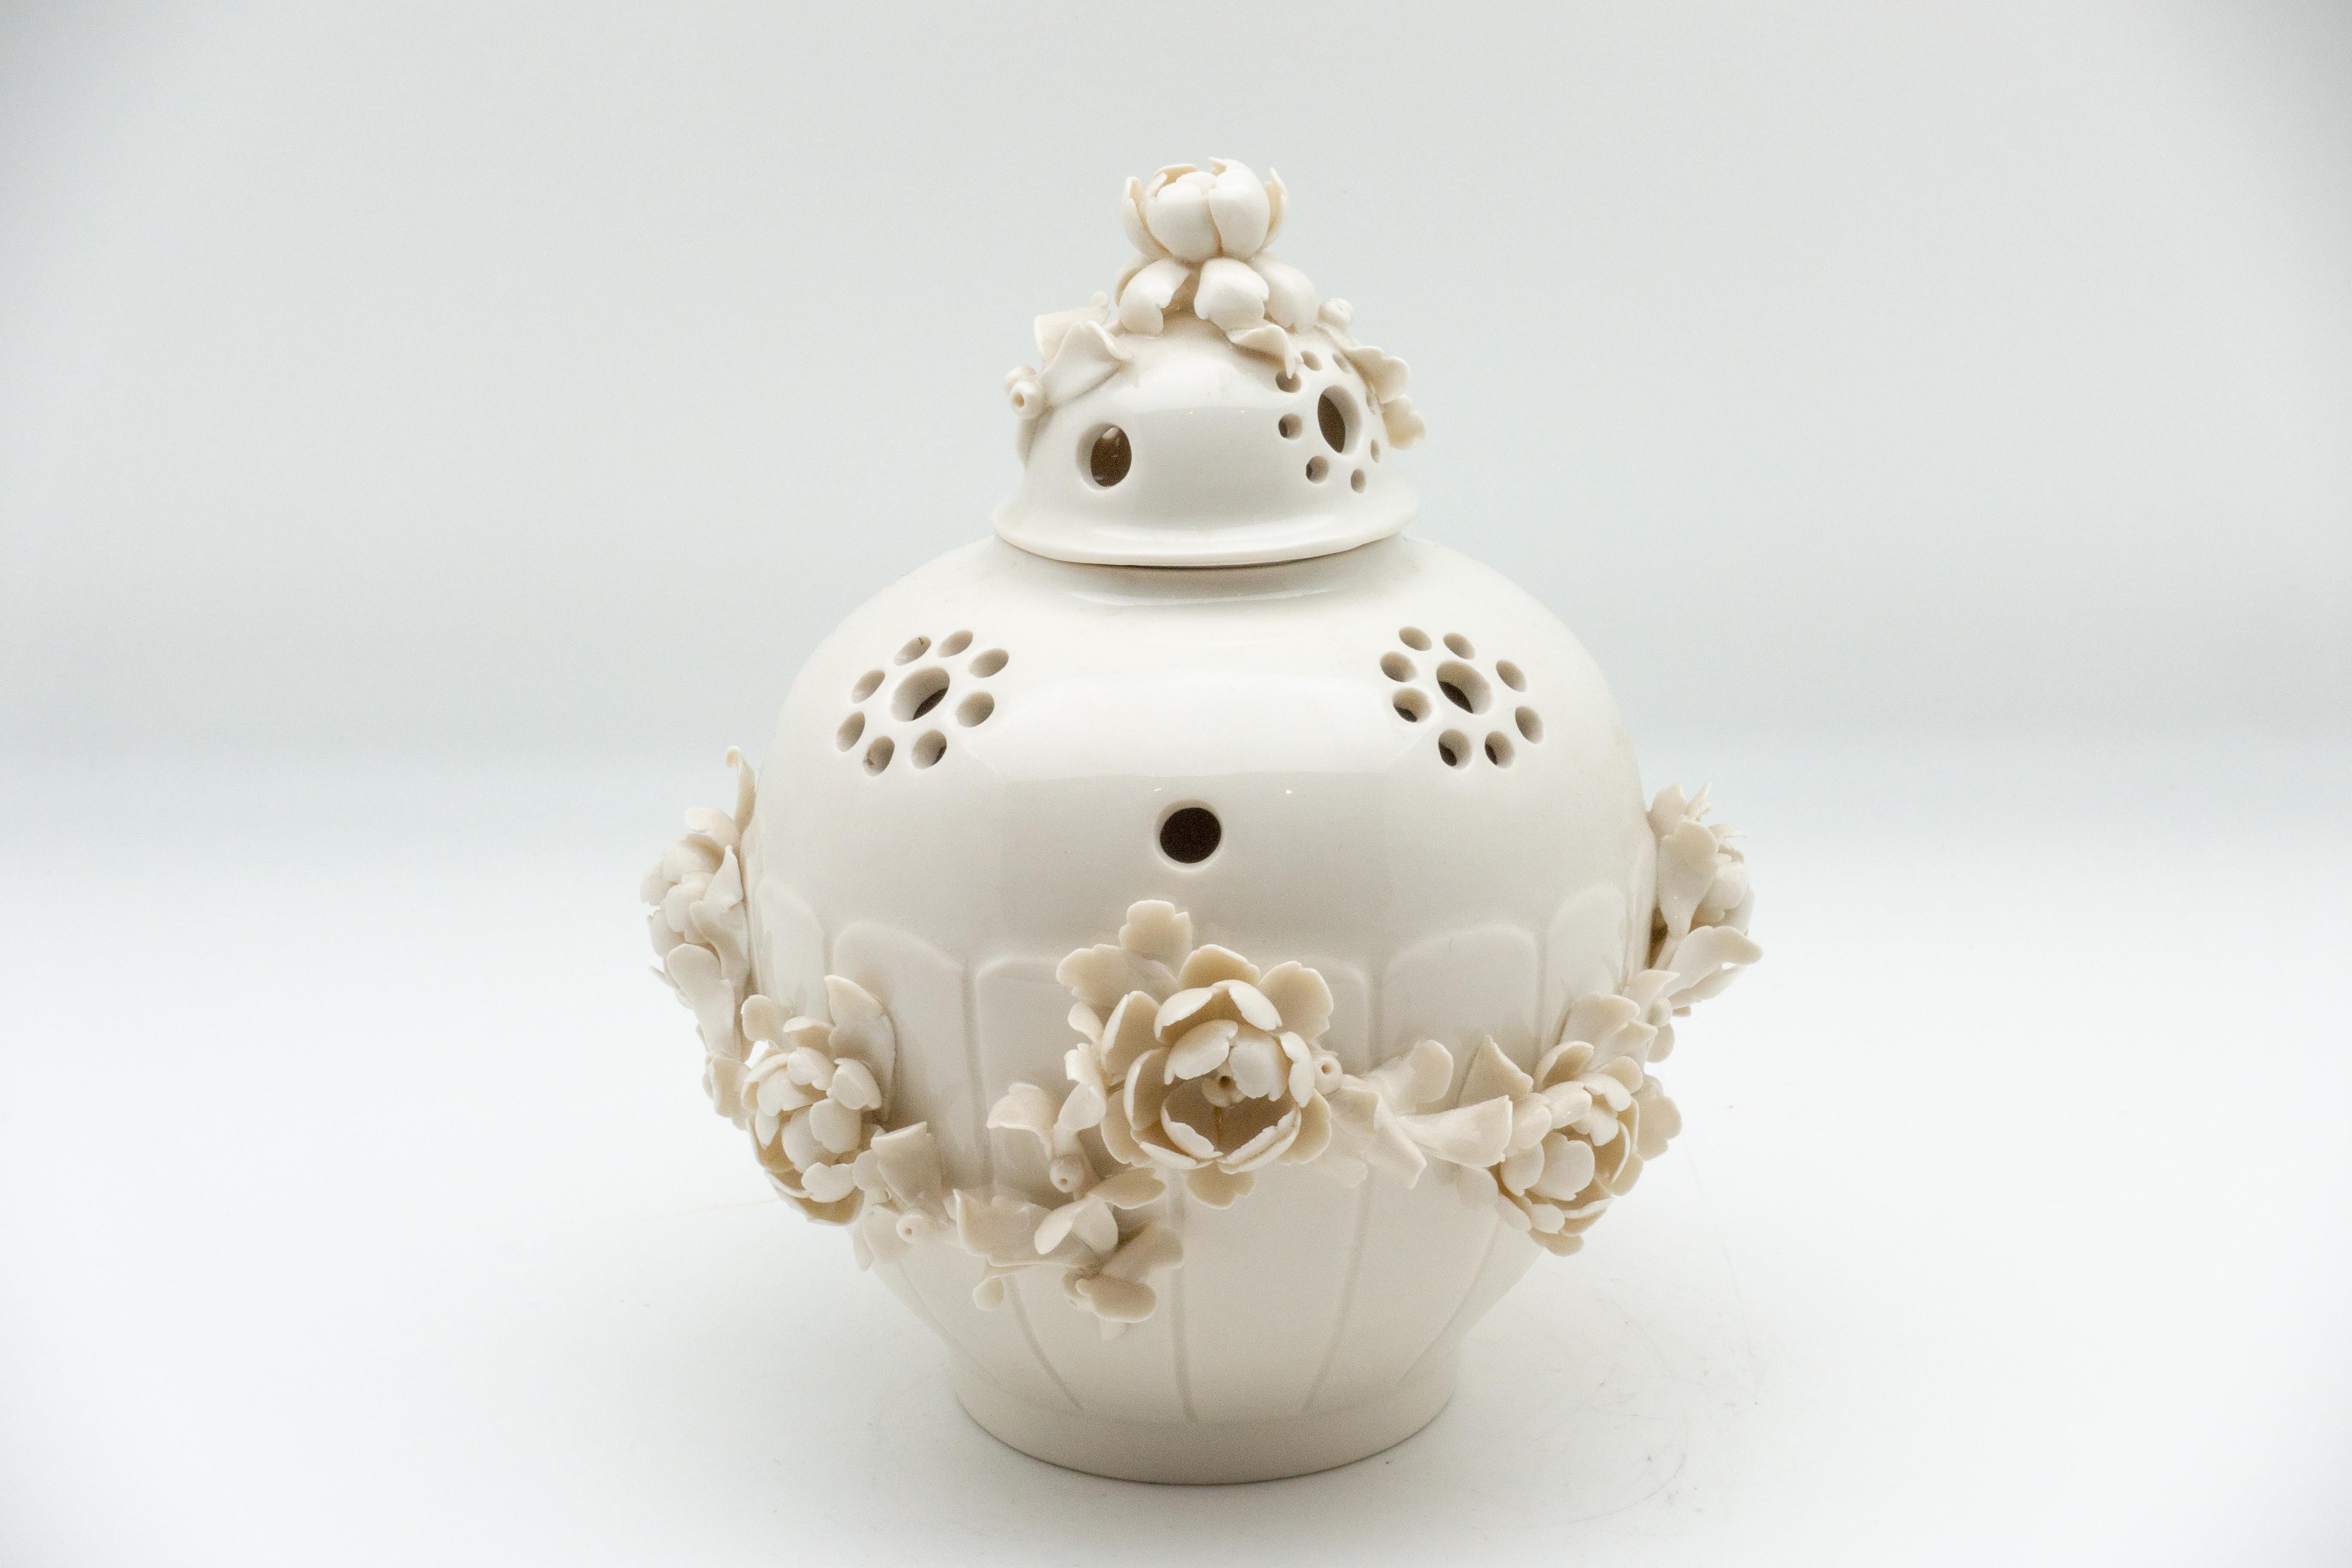 White porcelain pot-pourri vase in the style of the 18th century Saint-Cloud soft paste porcelain production, just outside of Paris, France. The vase has a pierced shoulder and the cover is domed, both applied with high relief garlands of flowers.